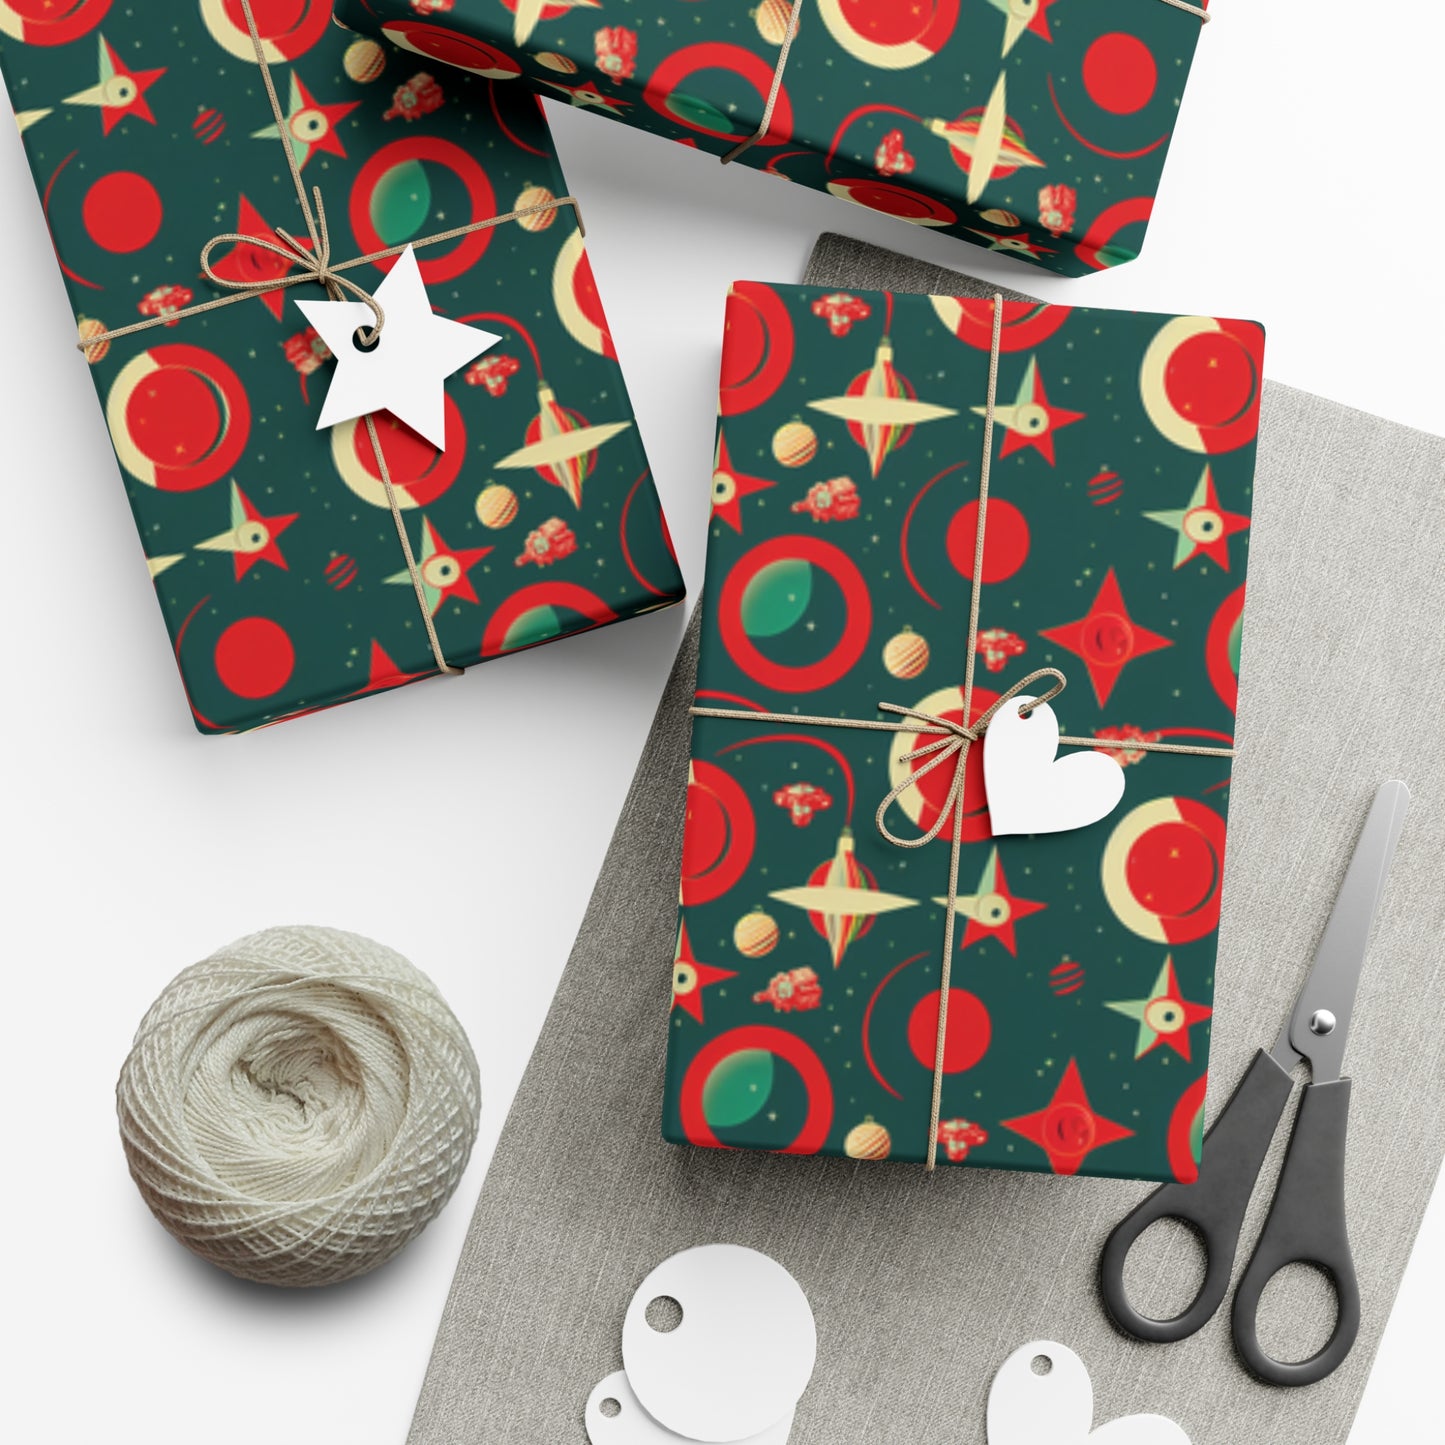 Black Ocean Red and Green Space gift wrap roll